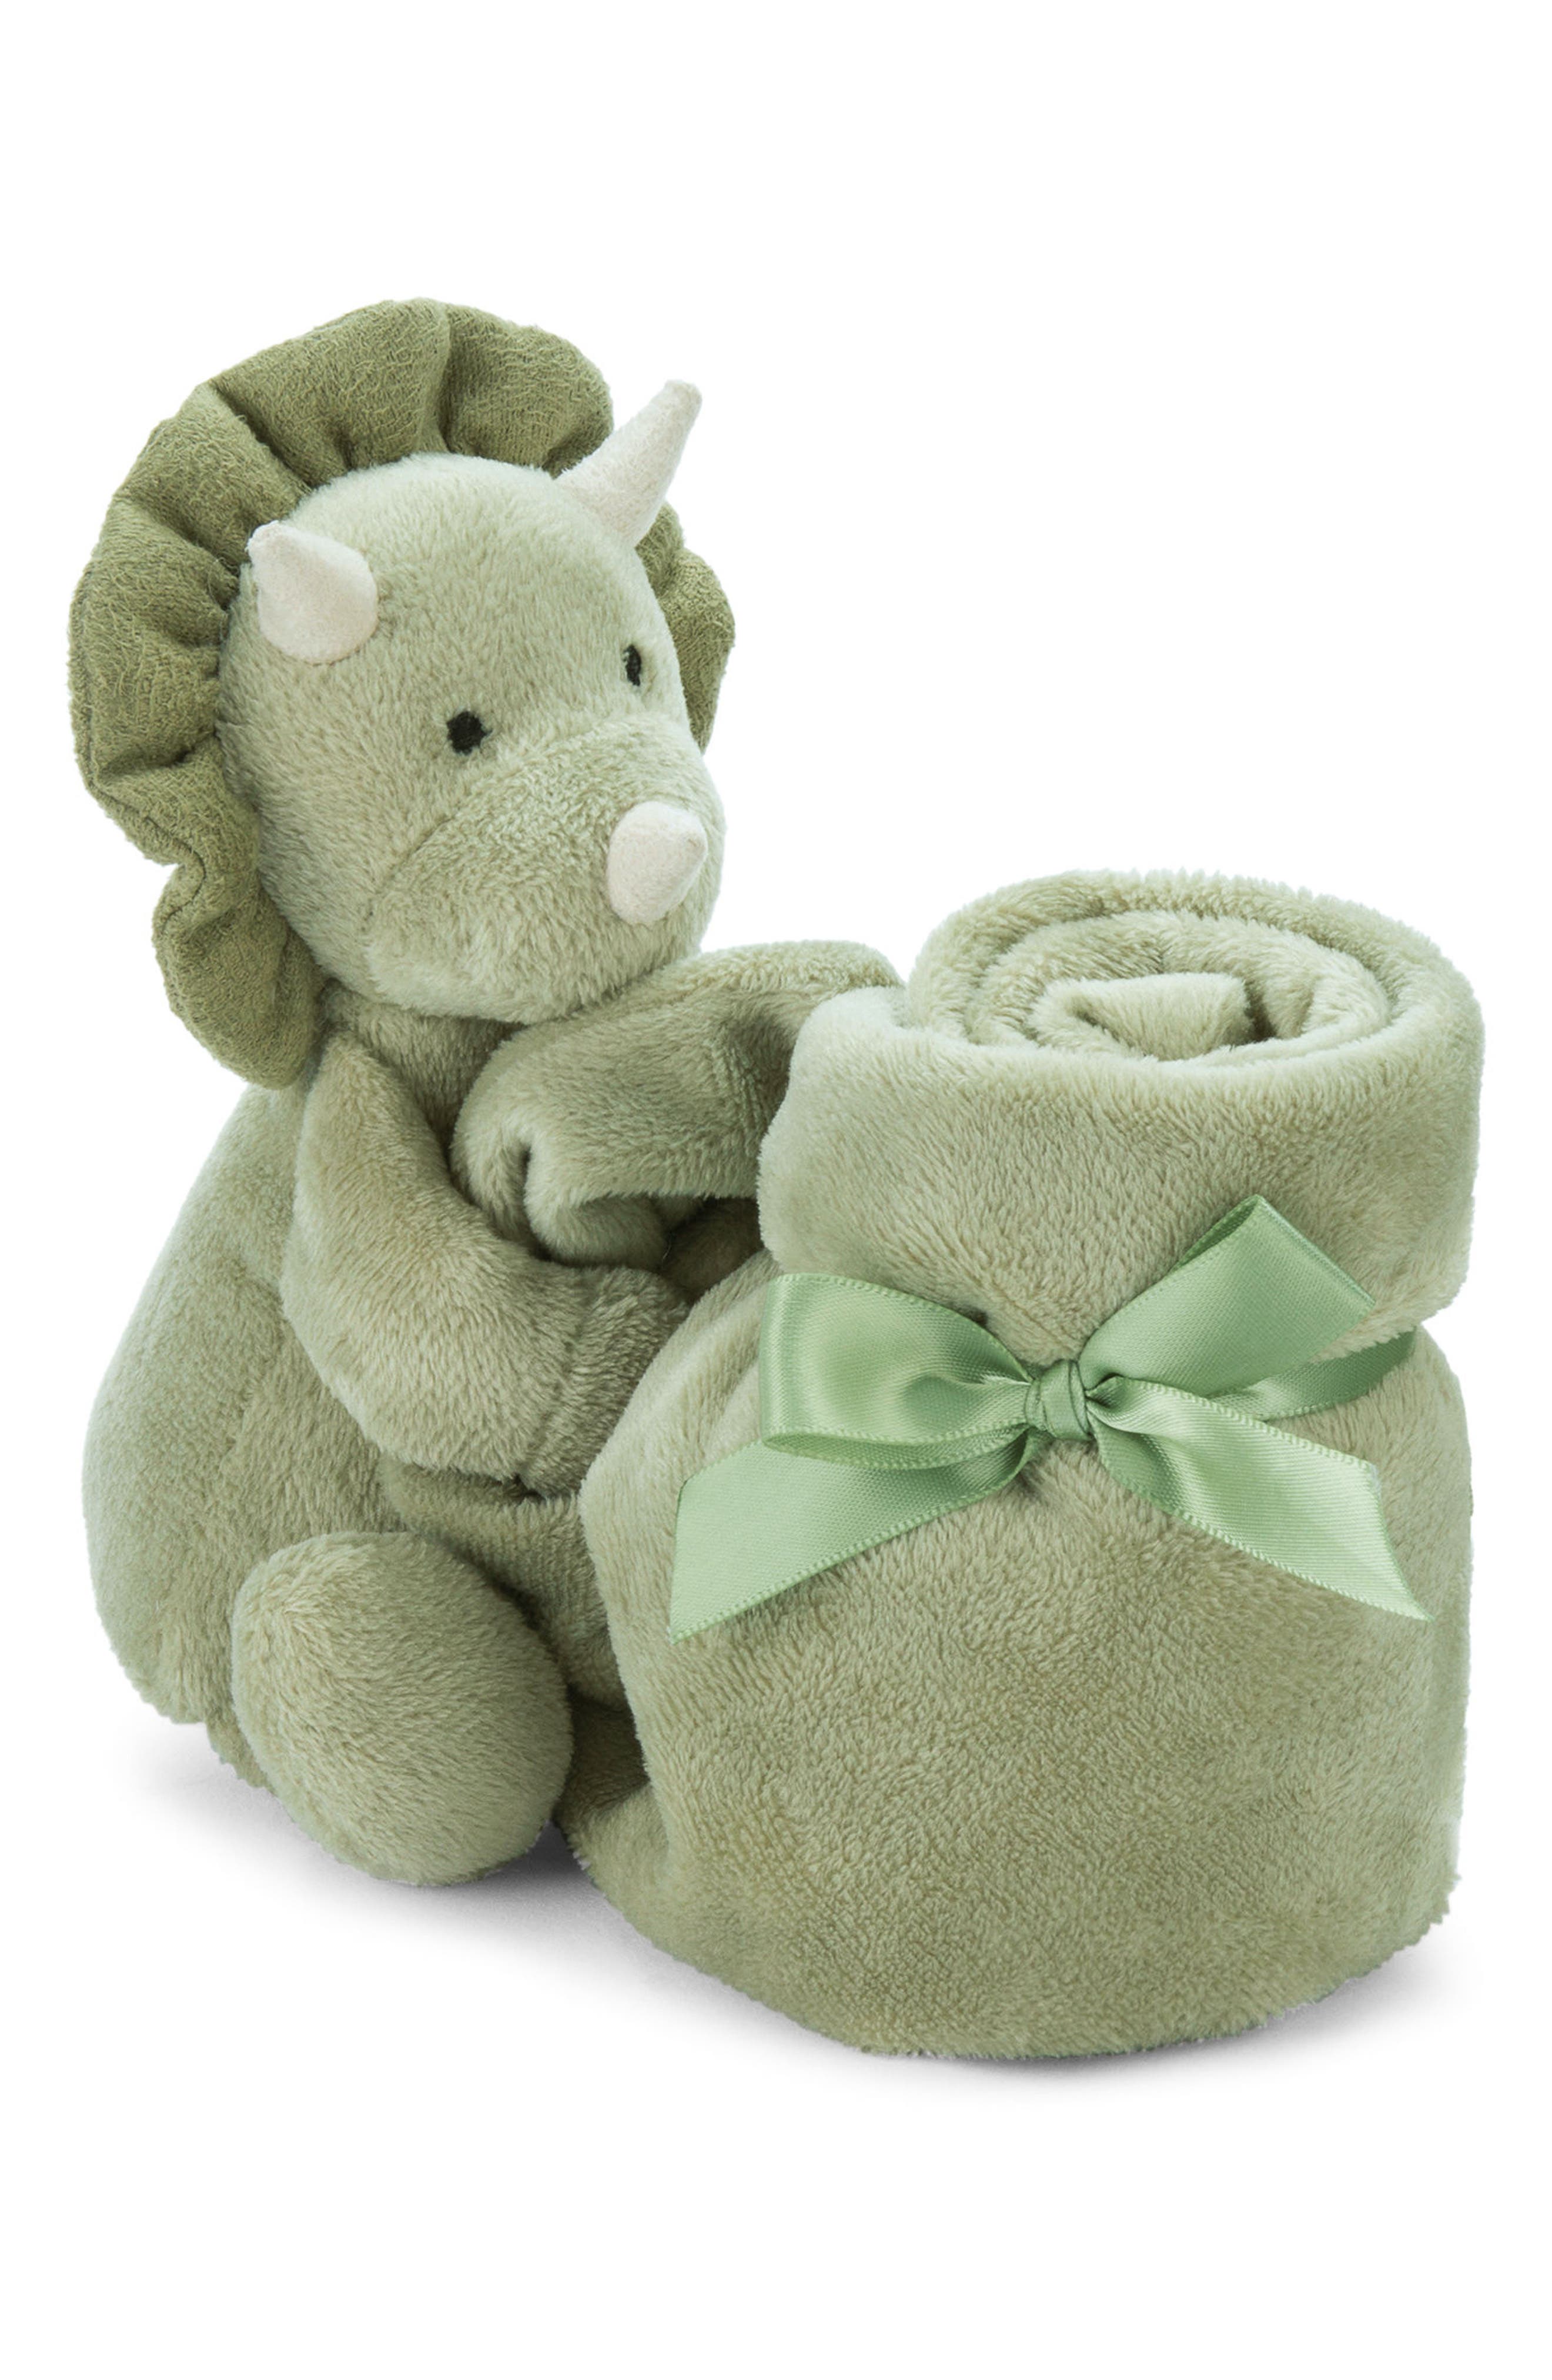 jellycat duffie dino soother